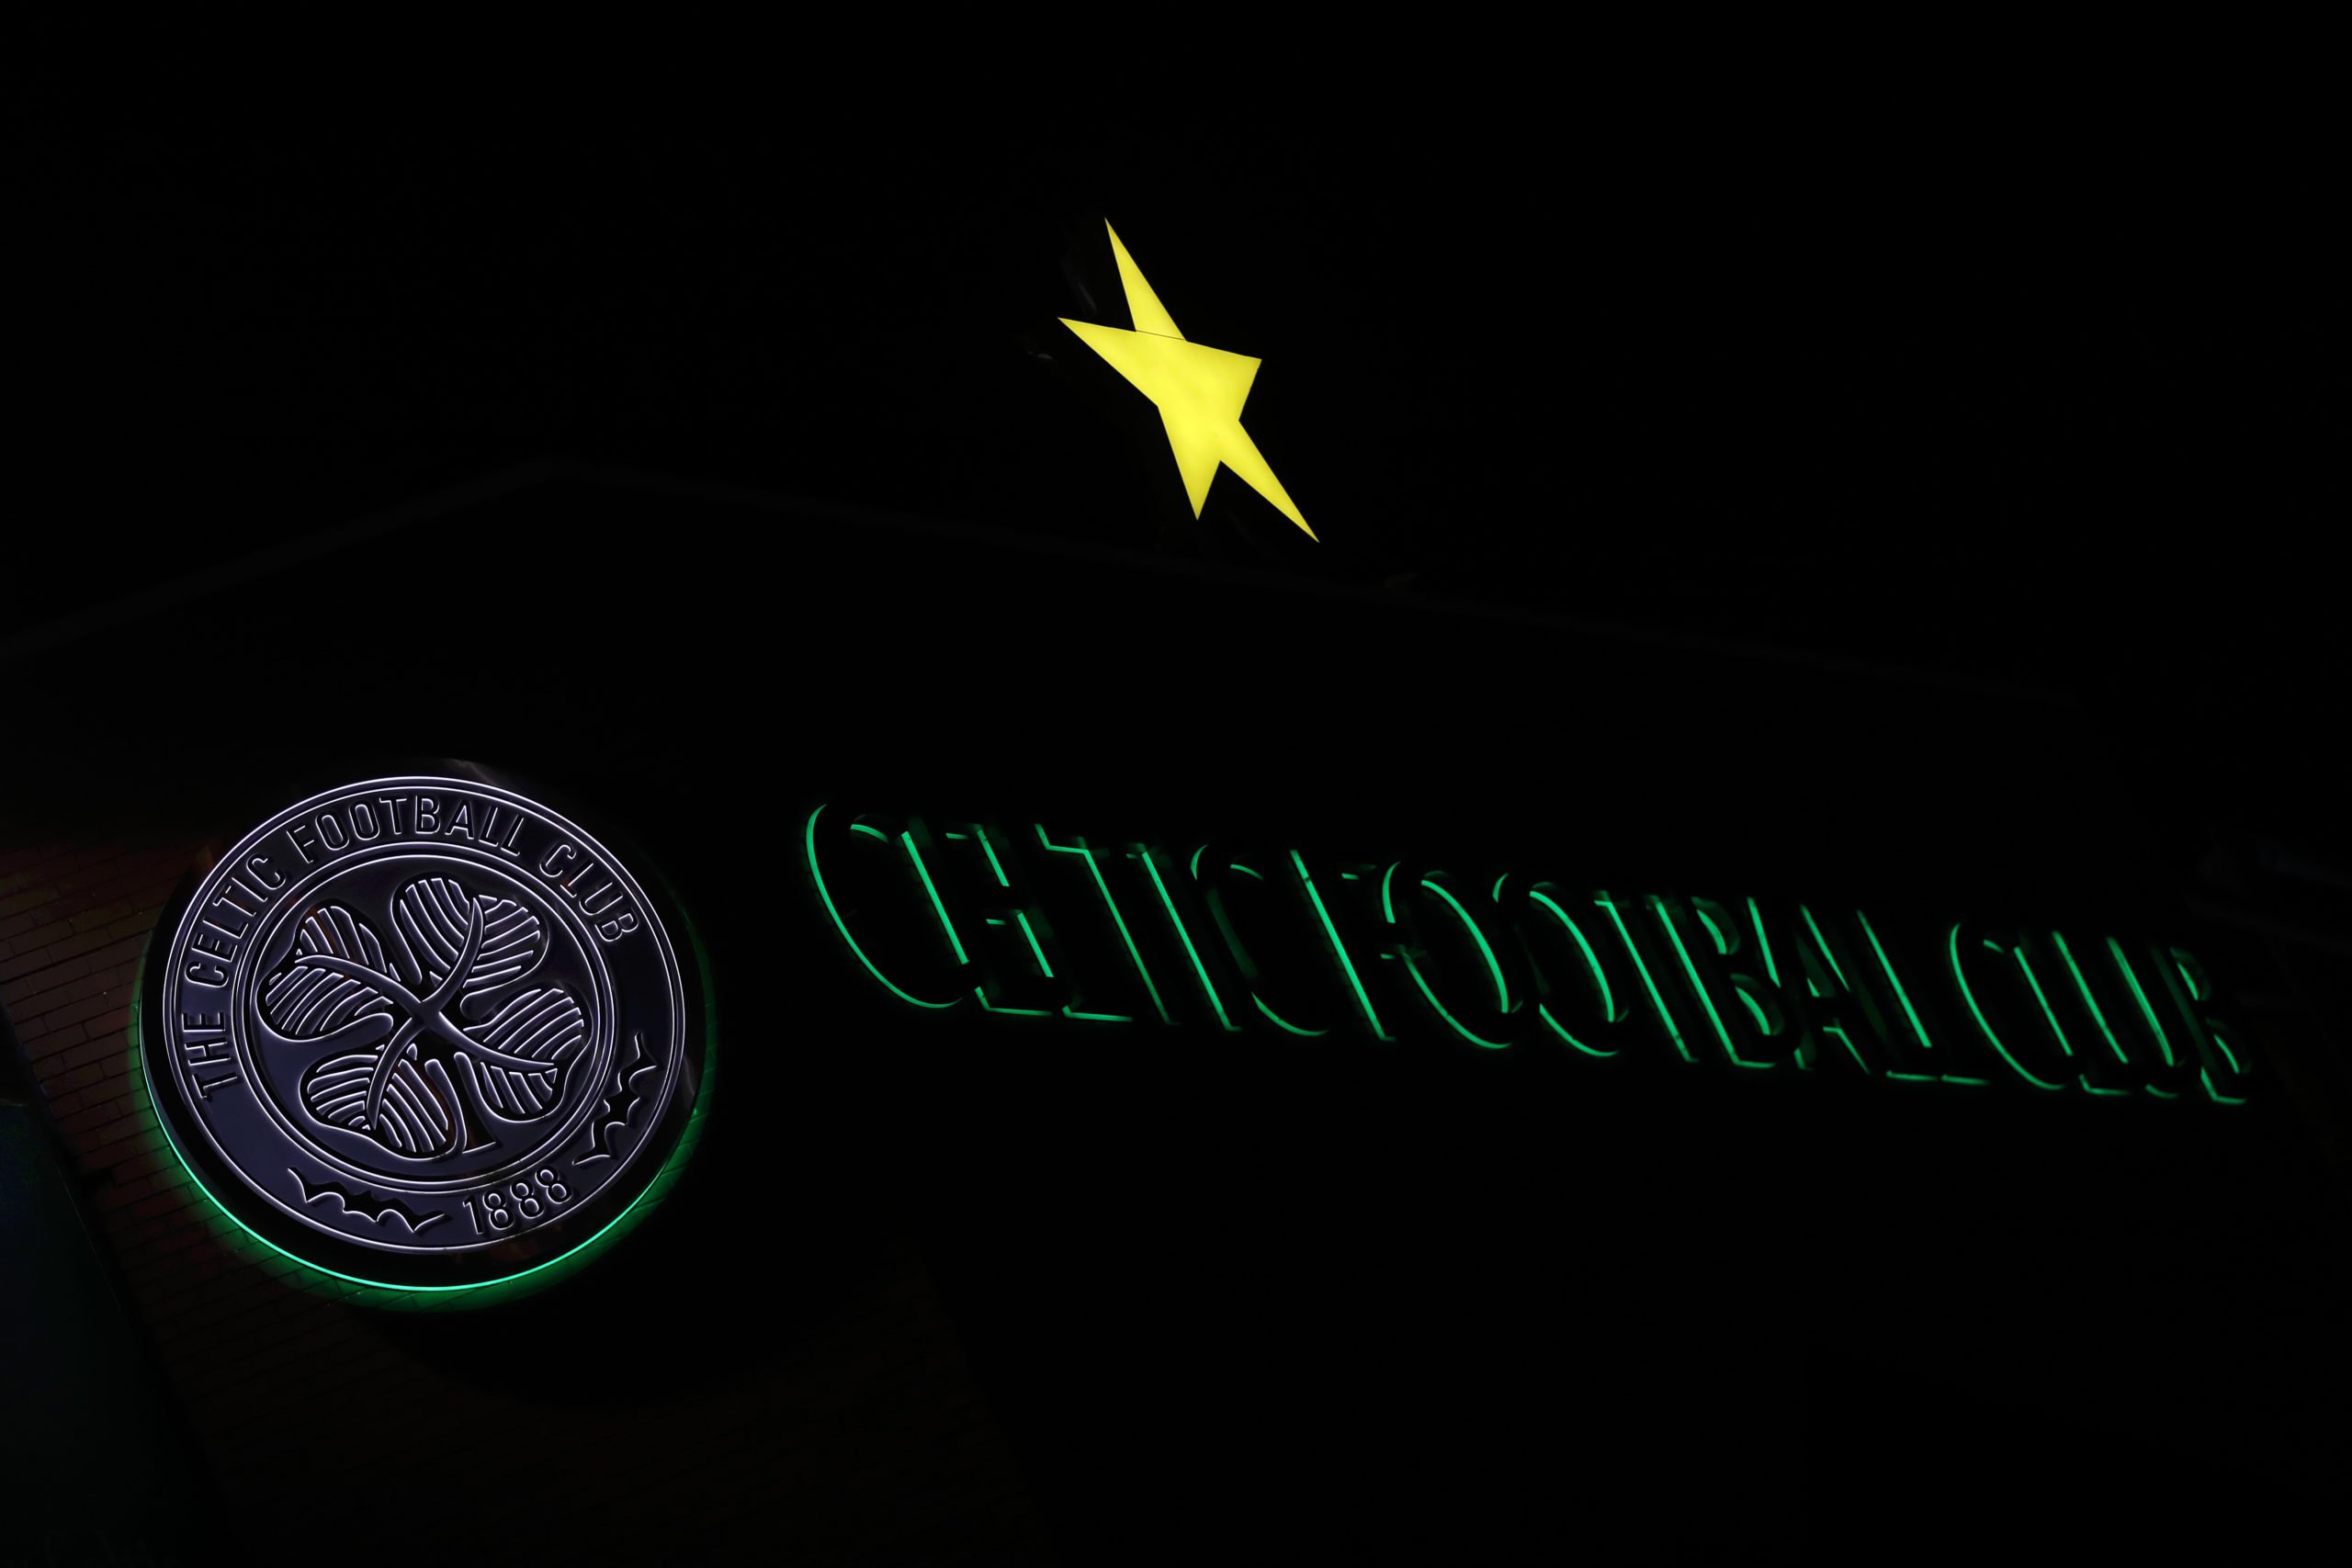 Celtic restart communications after silence in typically disappointing fashion